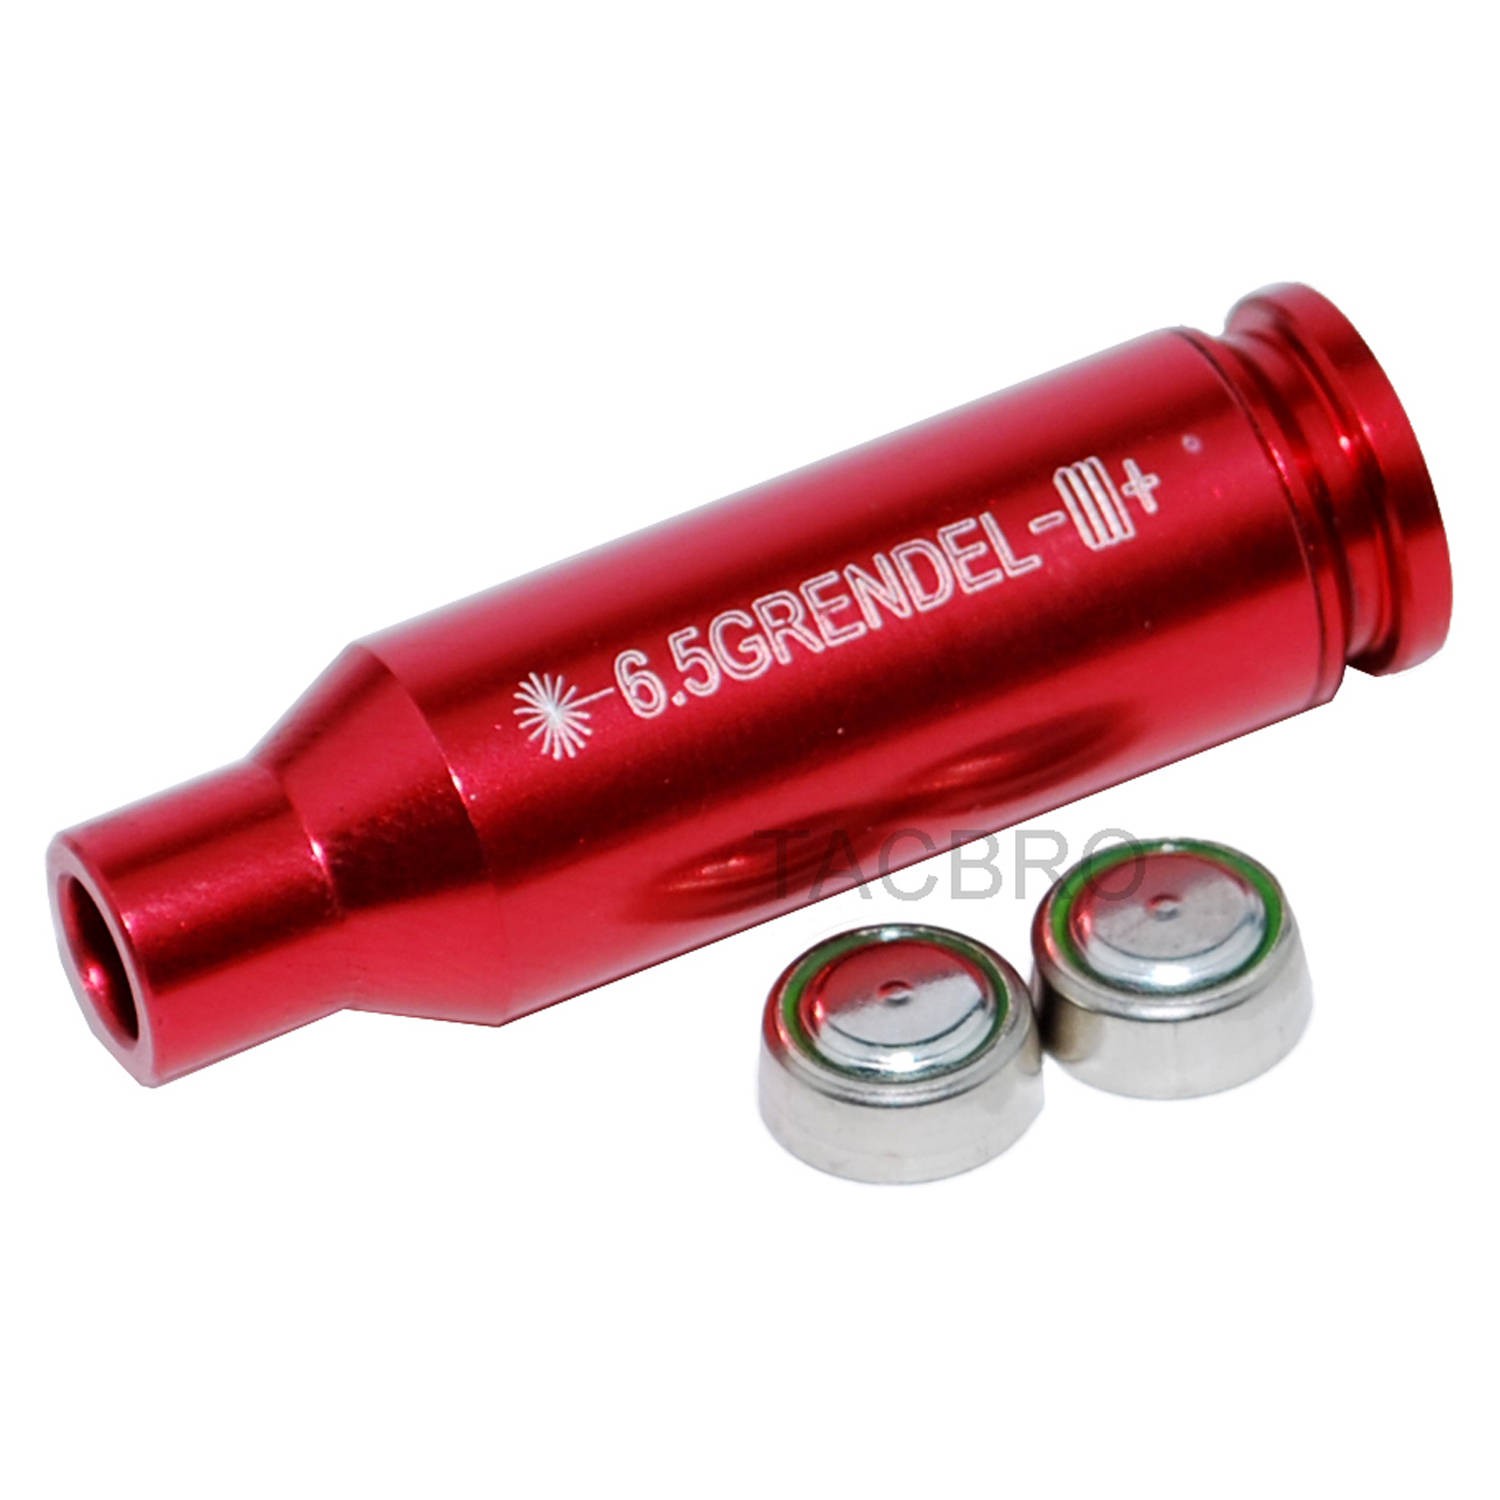 Aluminum Red Anodized Finish 6.5 Grendel Laser Bore Sighter 